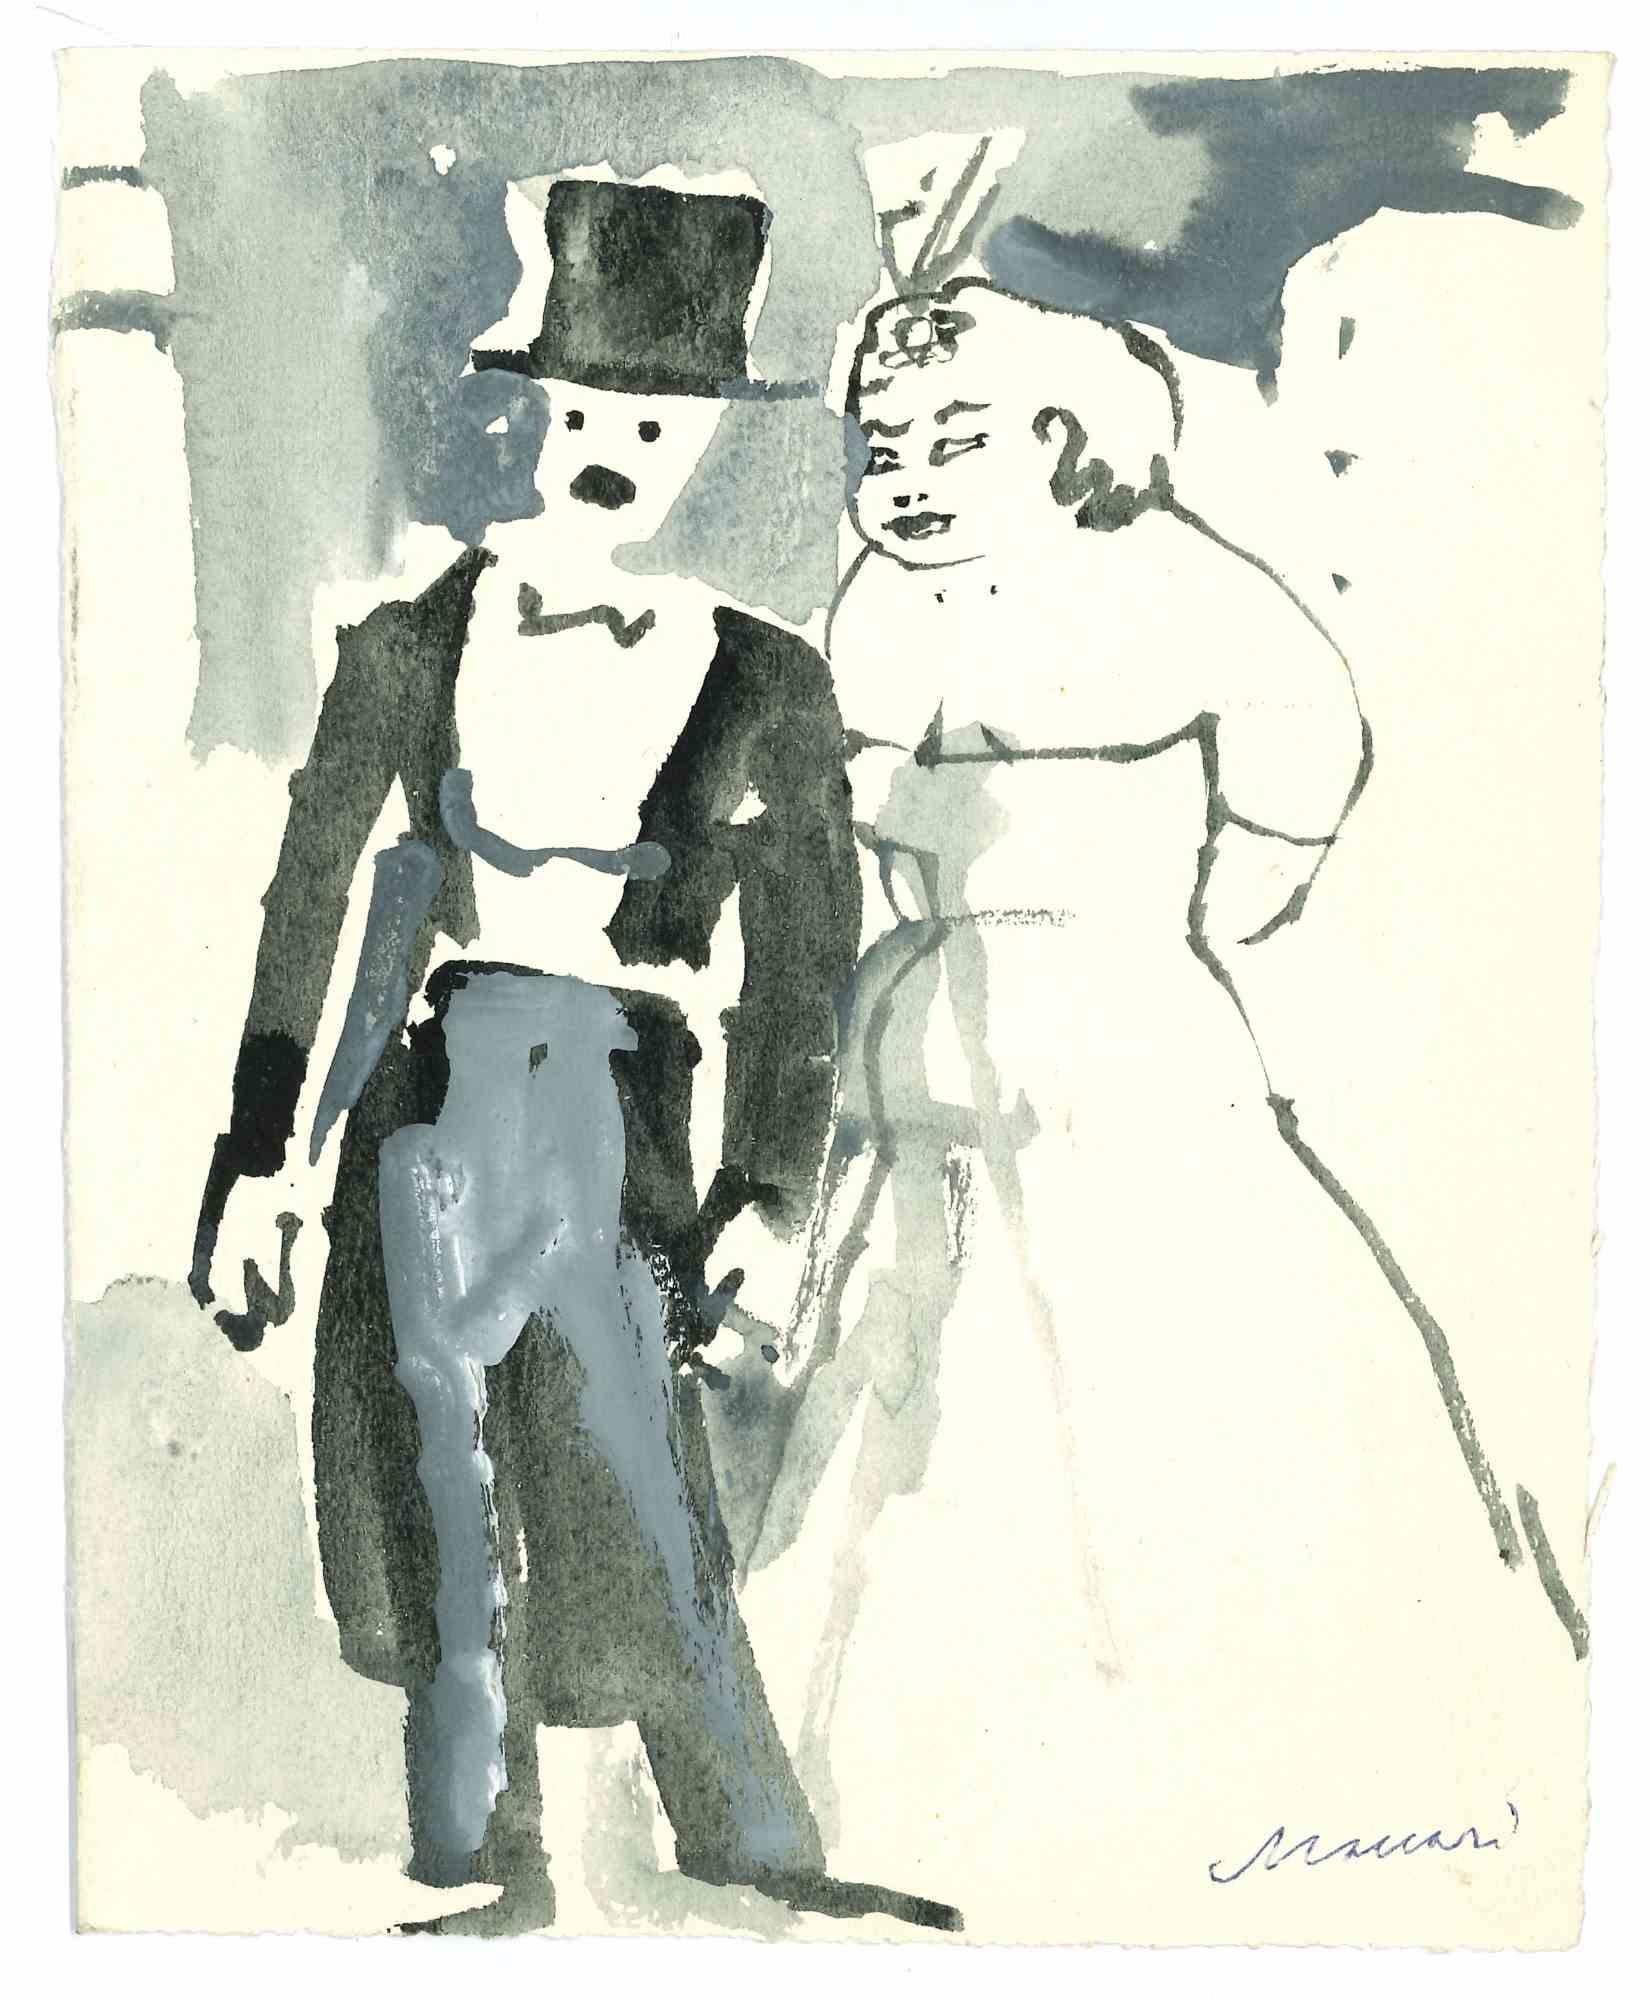 Couple is a charcoal and watercolor drawing realized by Mino Maccari  (1924-1989) in the Mid-20th Century.

Hand-signed.

Good conditions with slight foxing.

Mino Maccari (Siena, 1924-Rome, June 16, 1989) was an Italian writer, painter, engraver